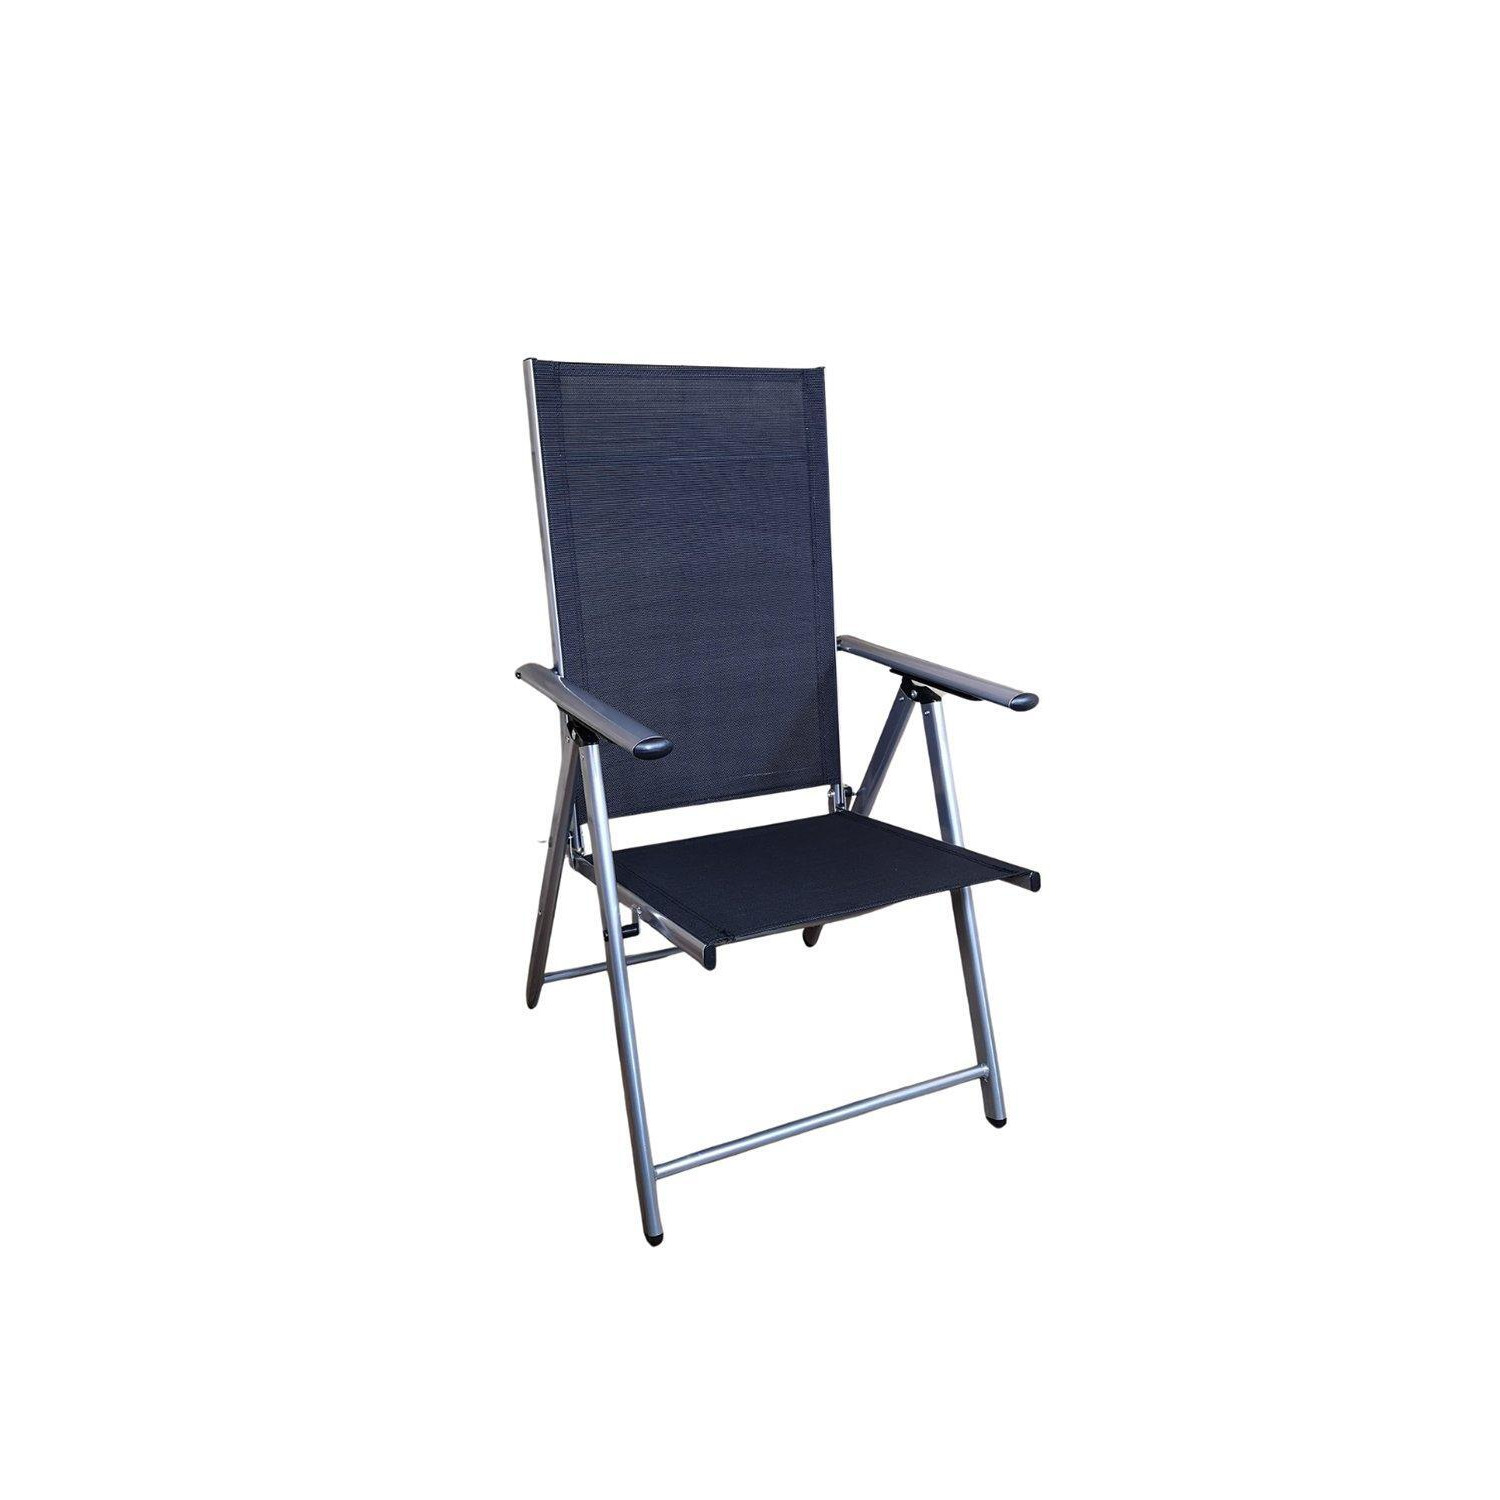 Multi Position High Back Reclining Garden / Outdoor Folding Chair in Black and Silver - image 1